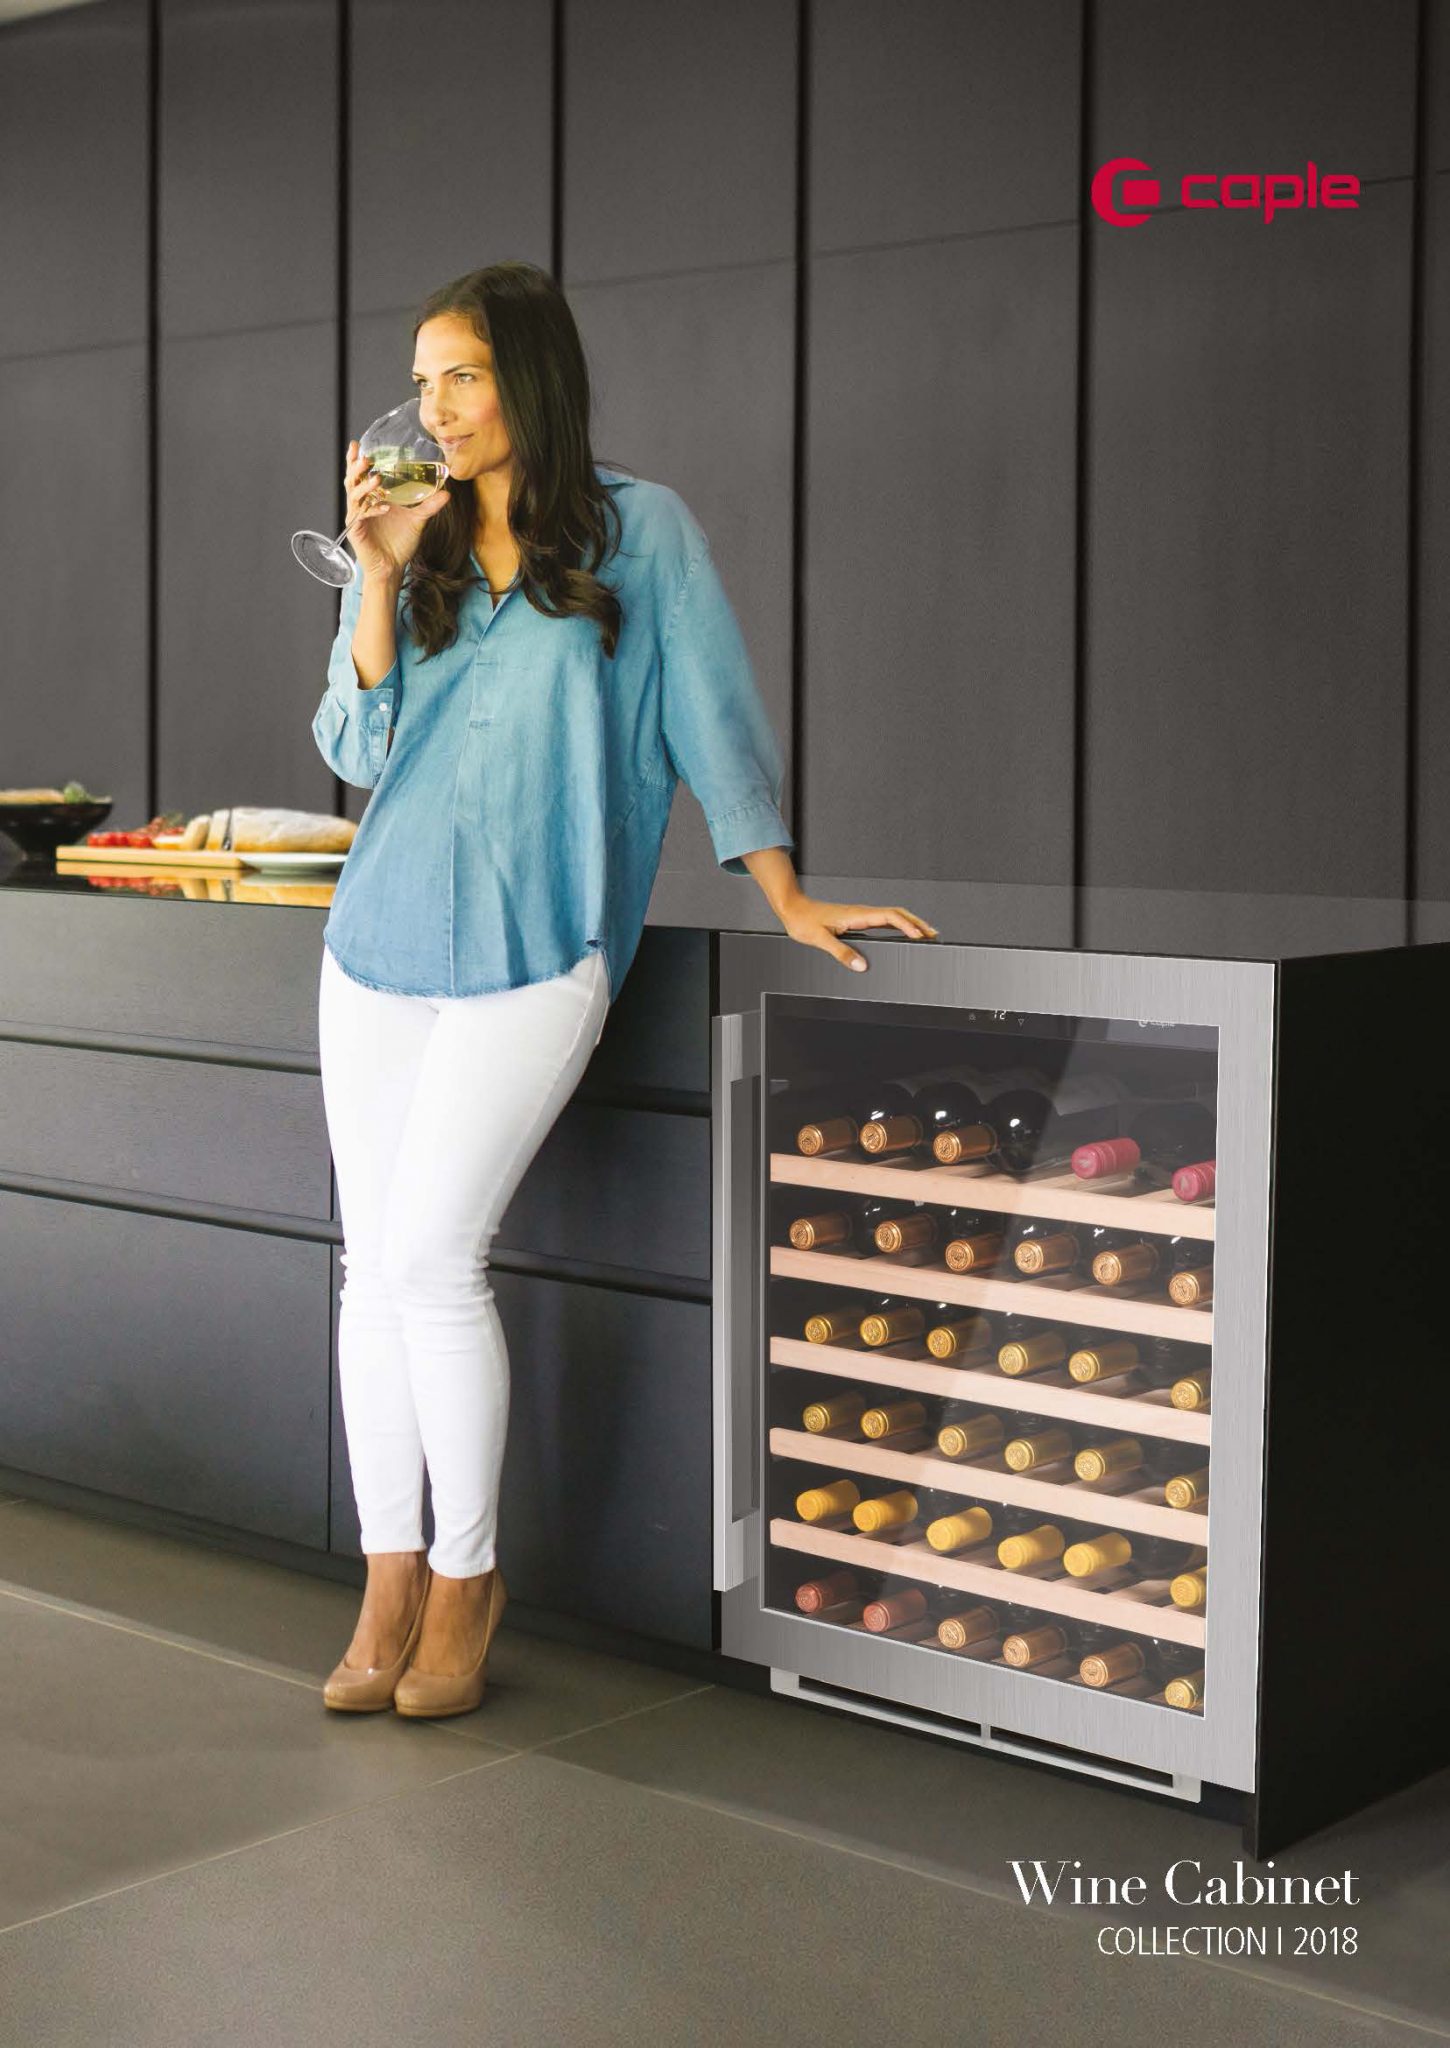 Raise a glass: Caple unveils its new  wine cabinet collection in stunning brochure